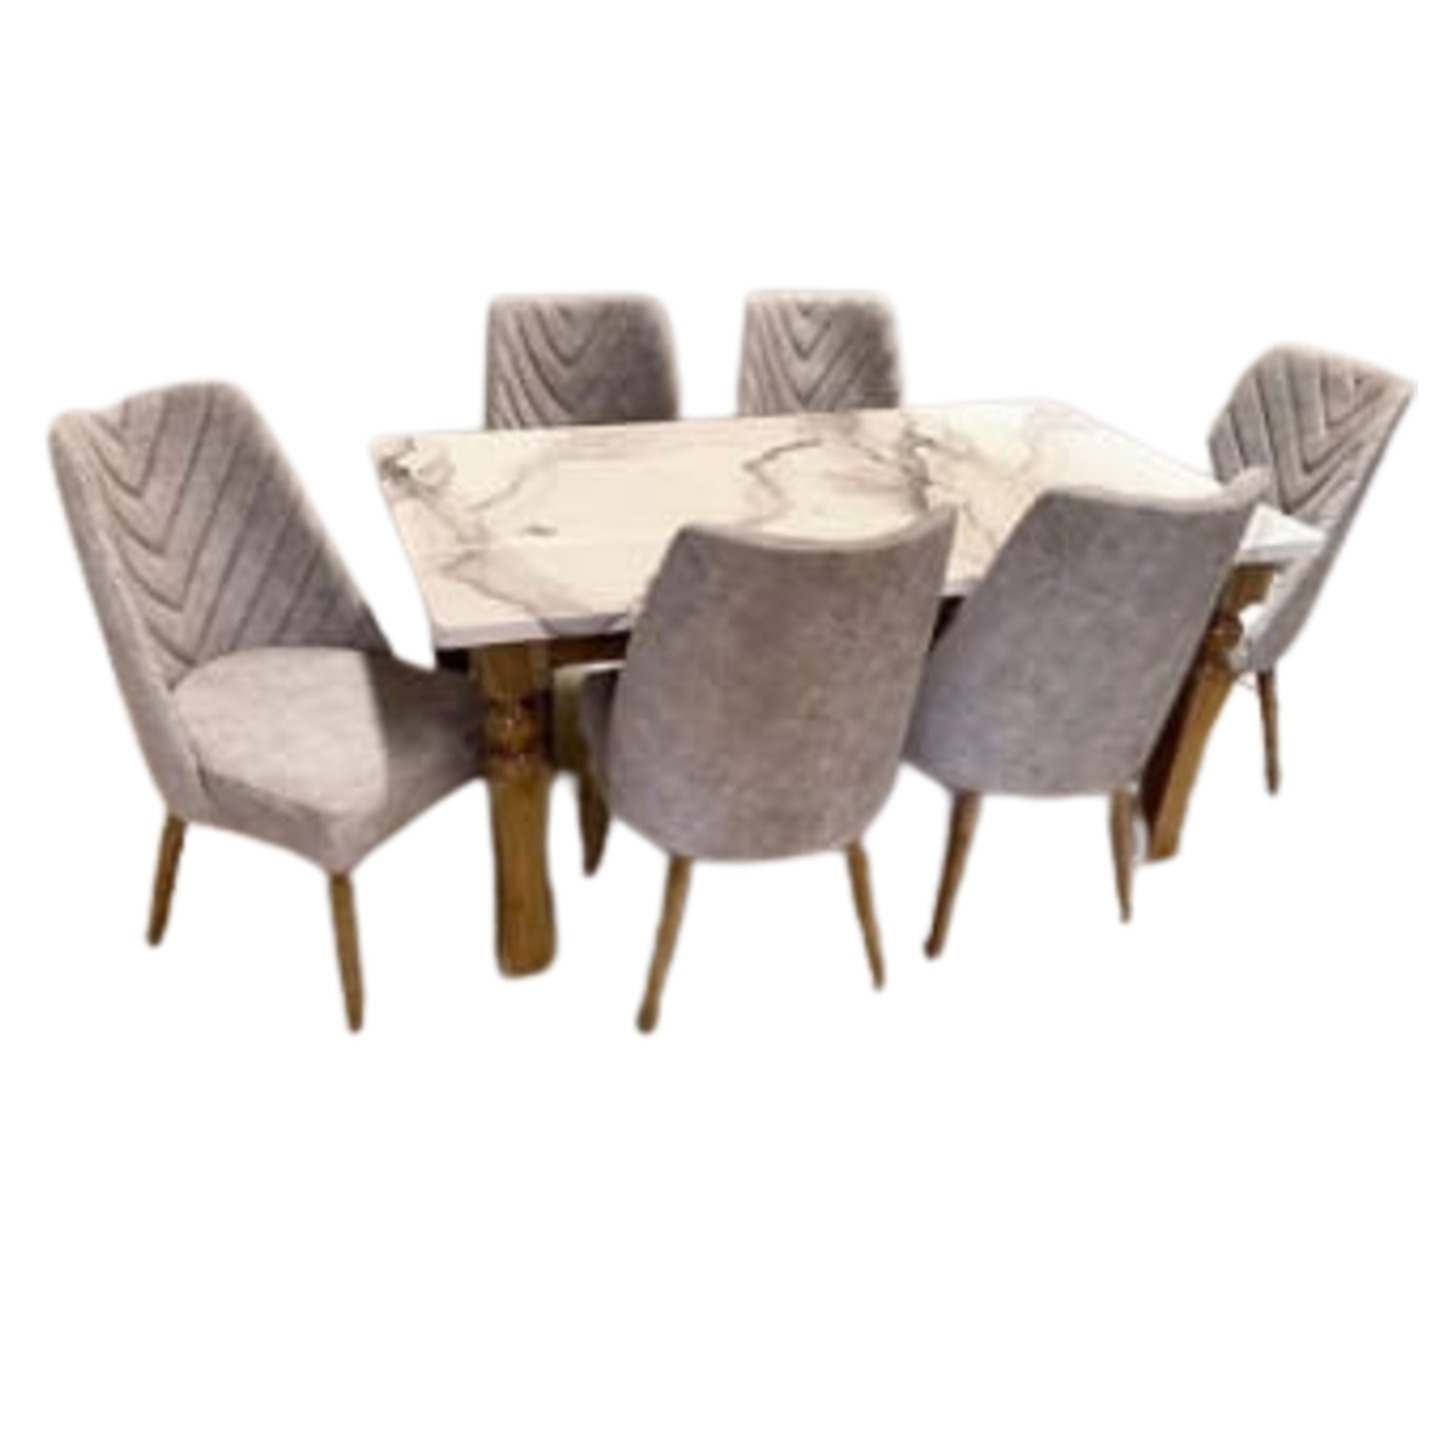 DW Marble Top H-006 Four Seater Dining Table Set in Brown Colour